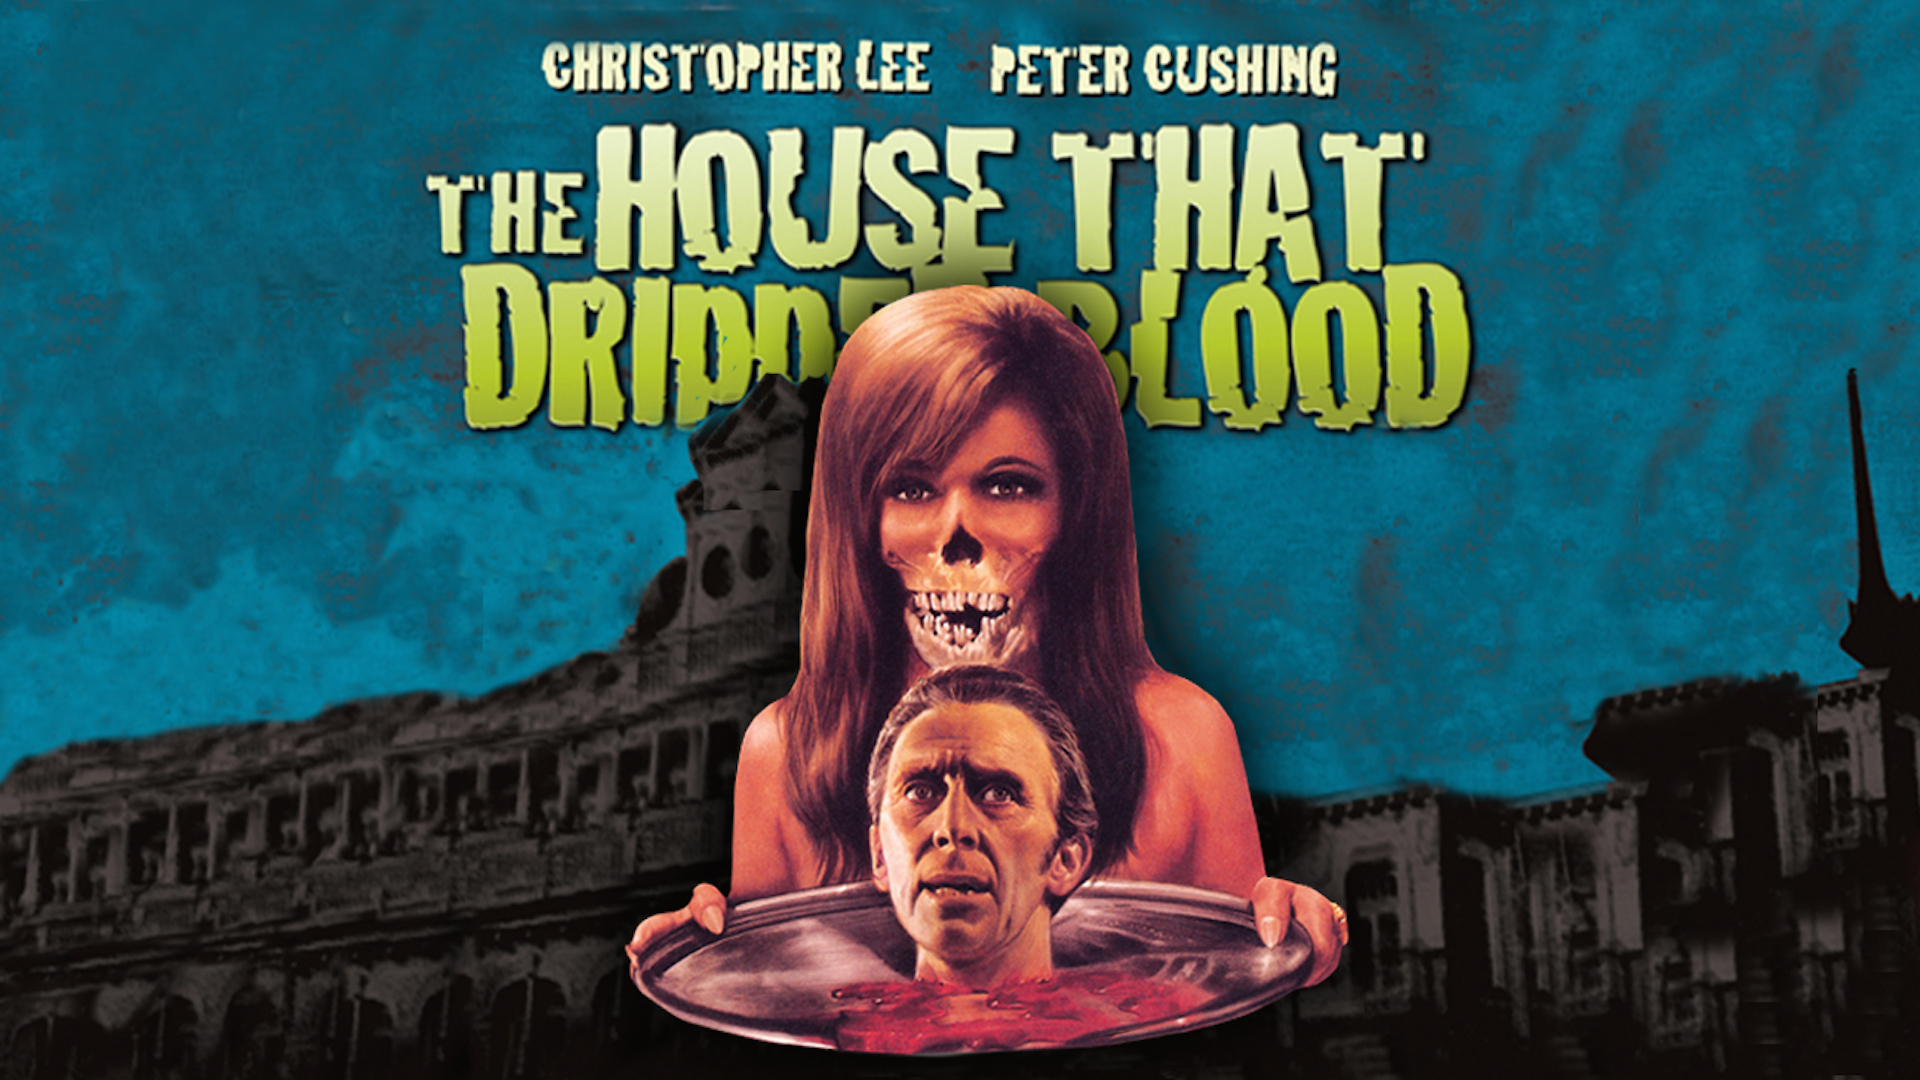 43-facts-about-the-movie-the-house-that-dripped-blood